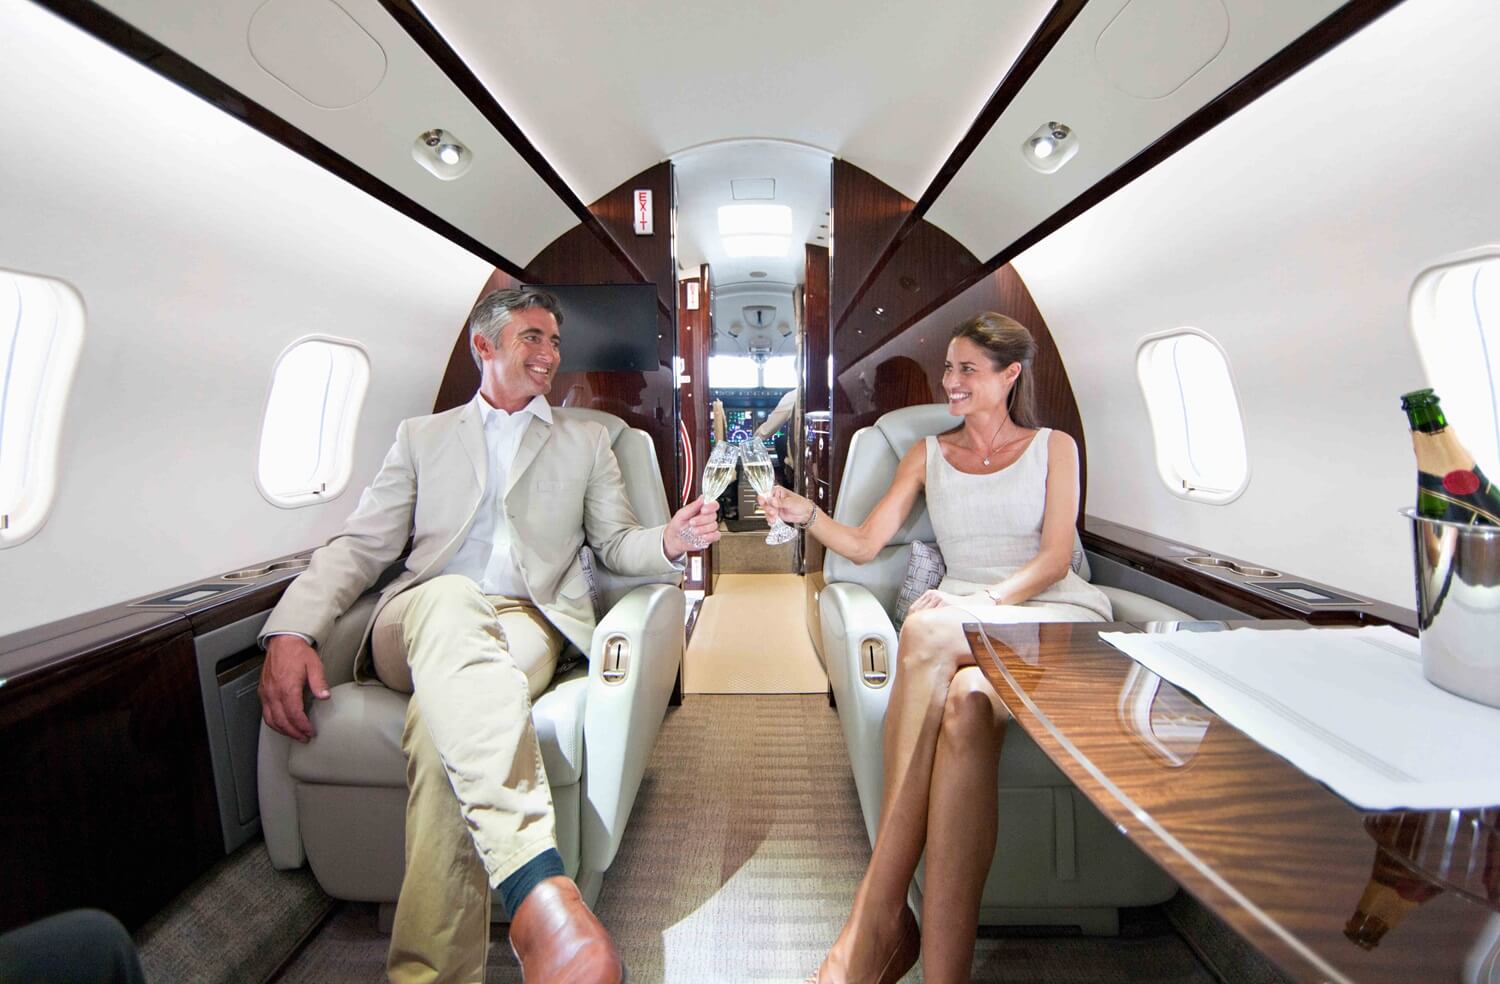 close up of a smiling couple making a toast in a private plane